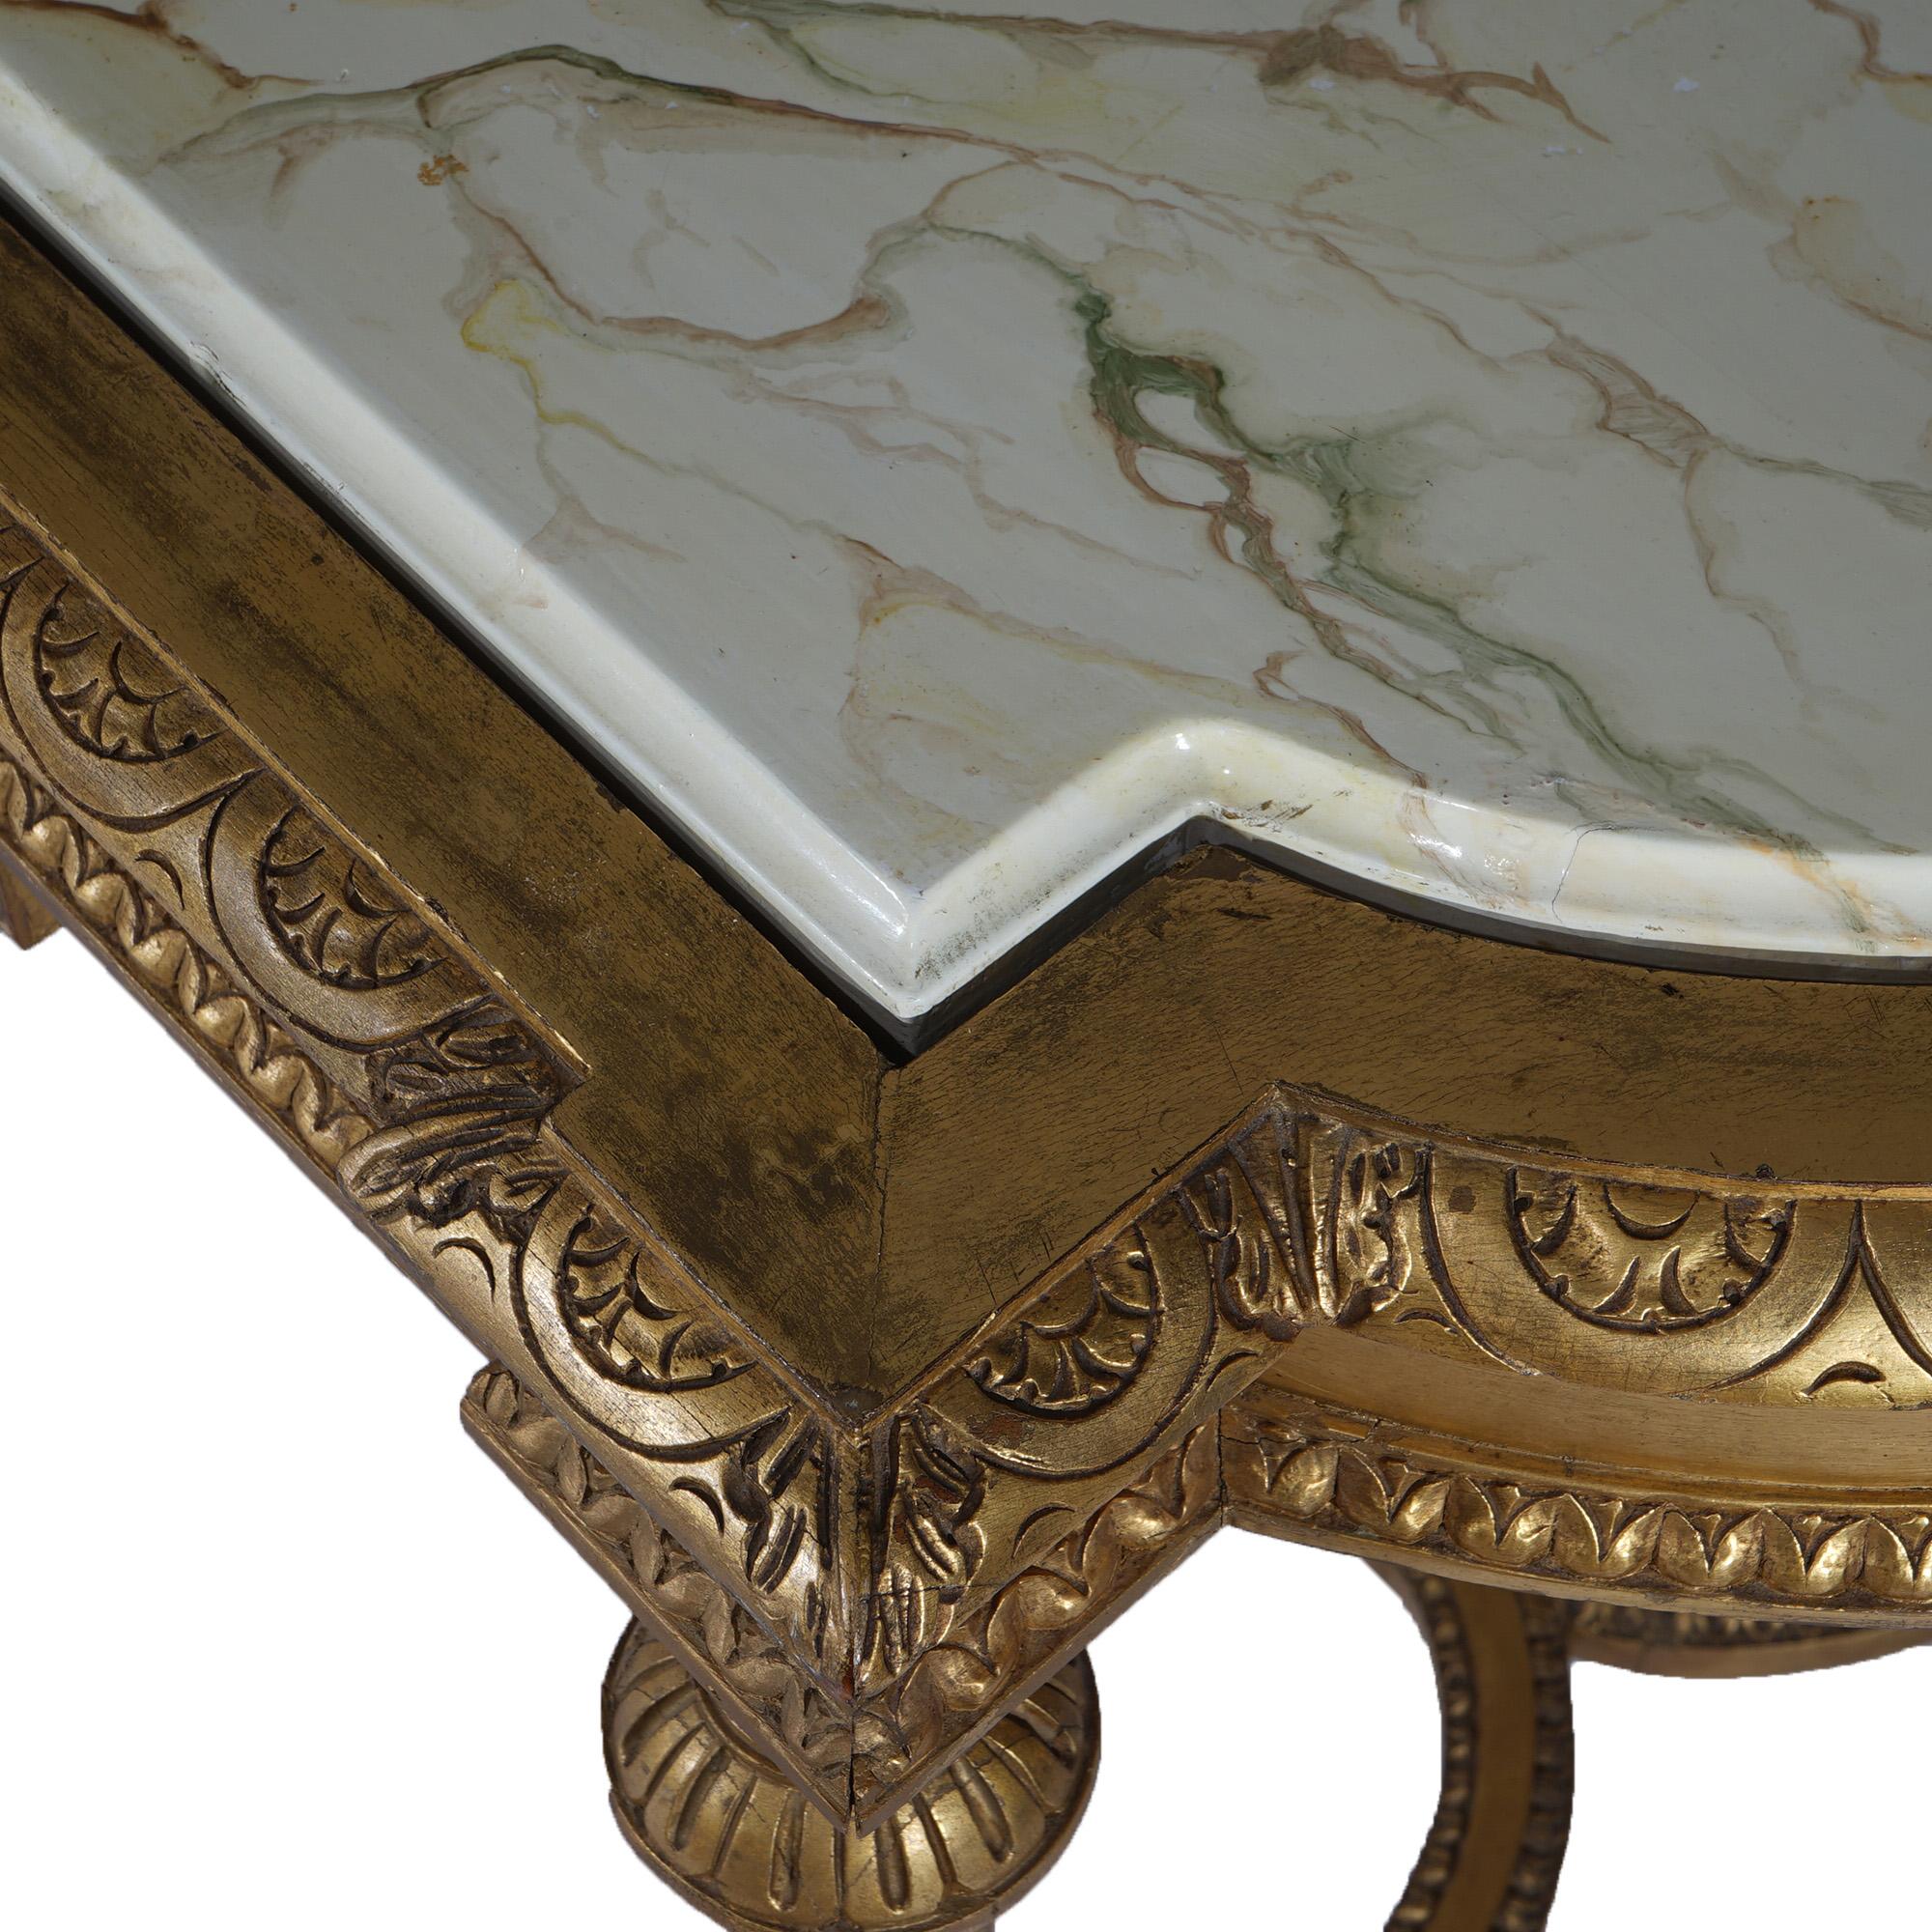 Antique French Louis XVI Style Giltwood Parlor Table with Faux Painted Top 19thC For Sale 9